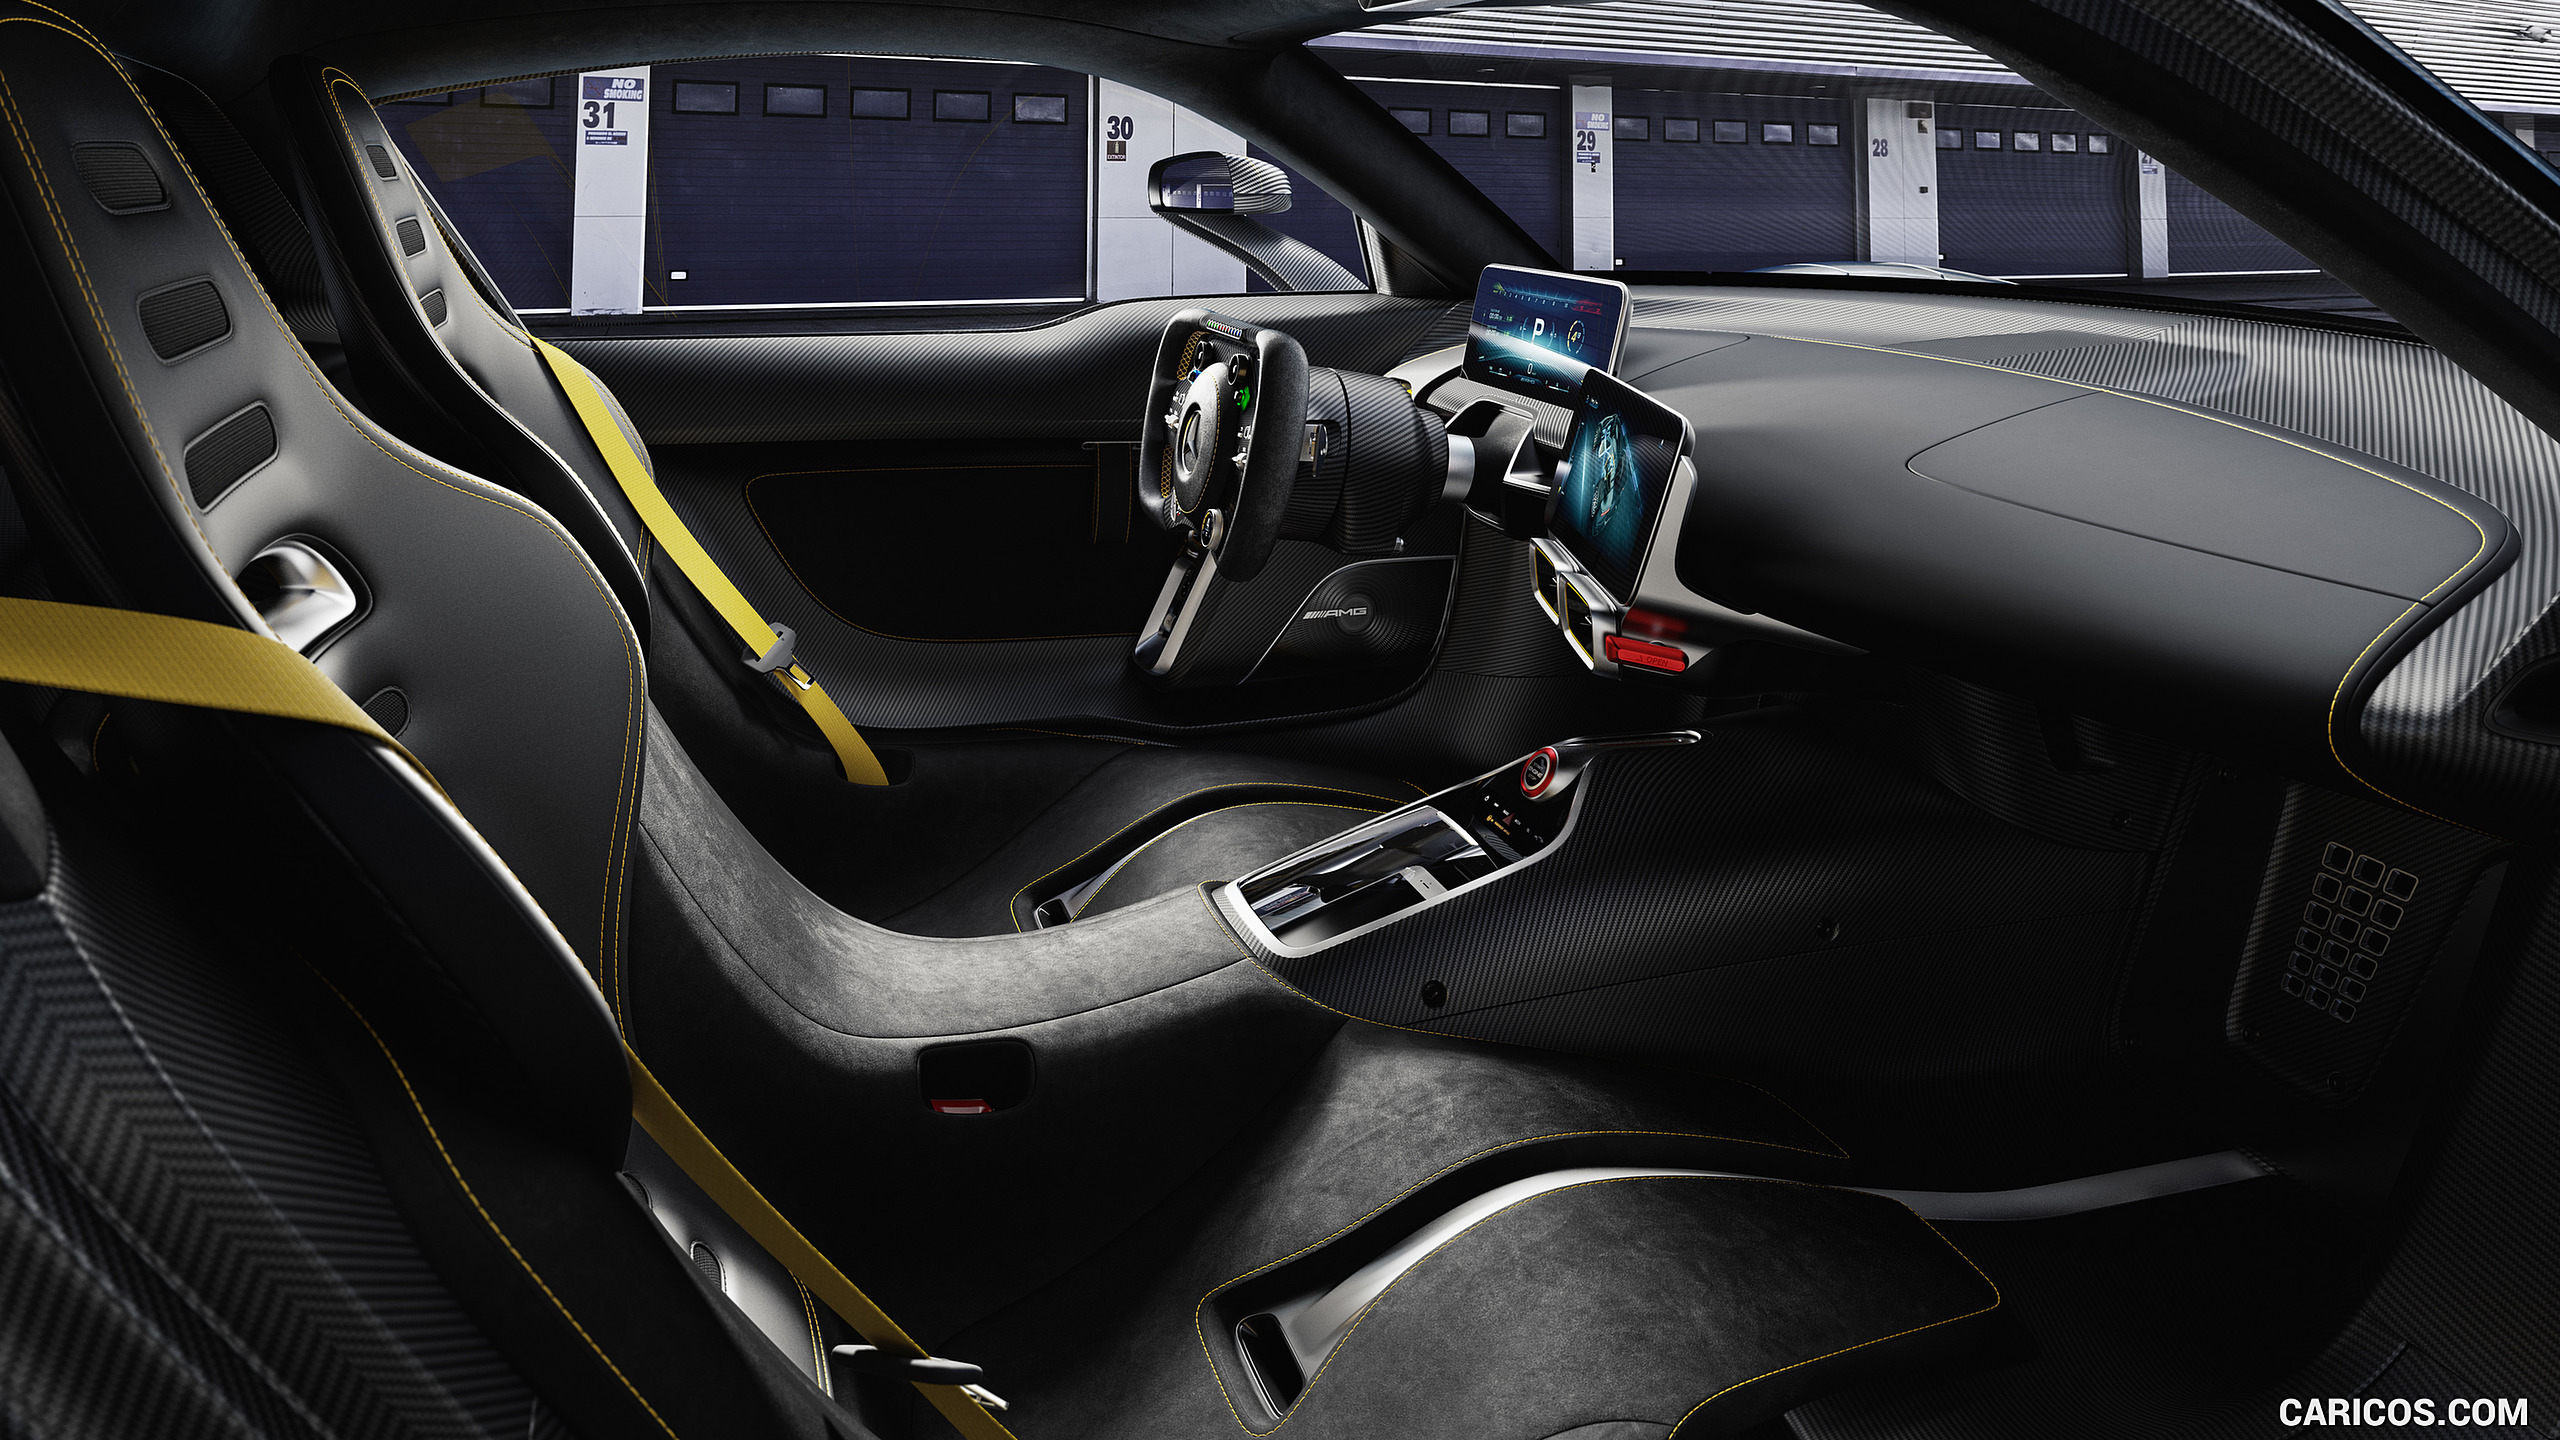 2017 Mercedes-AMG Project ONE - Interior, Seats, #13 of 13